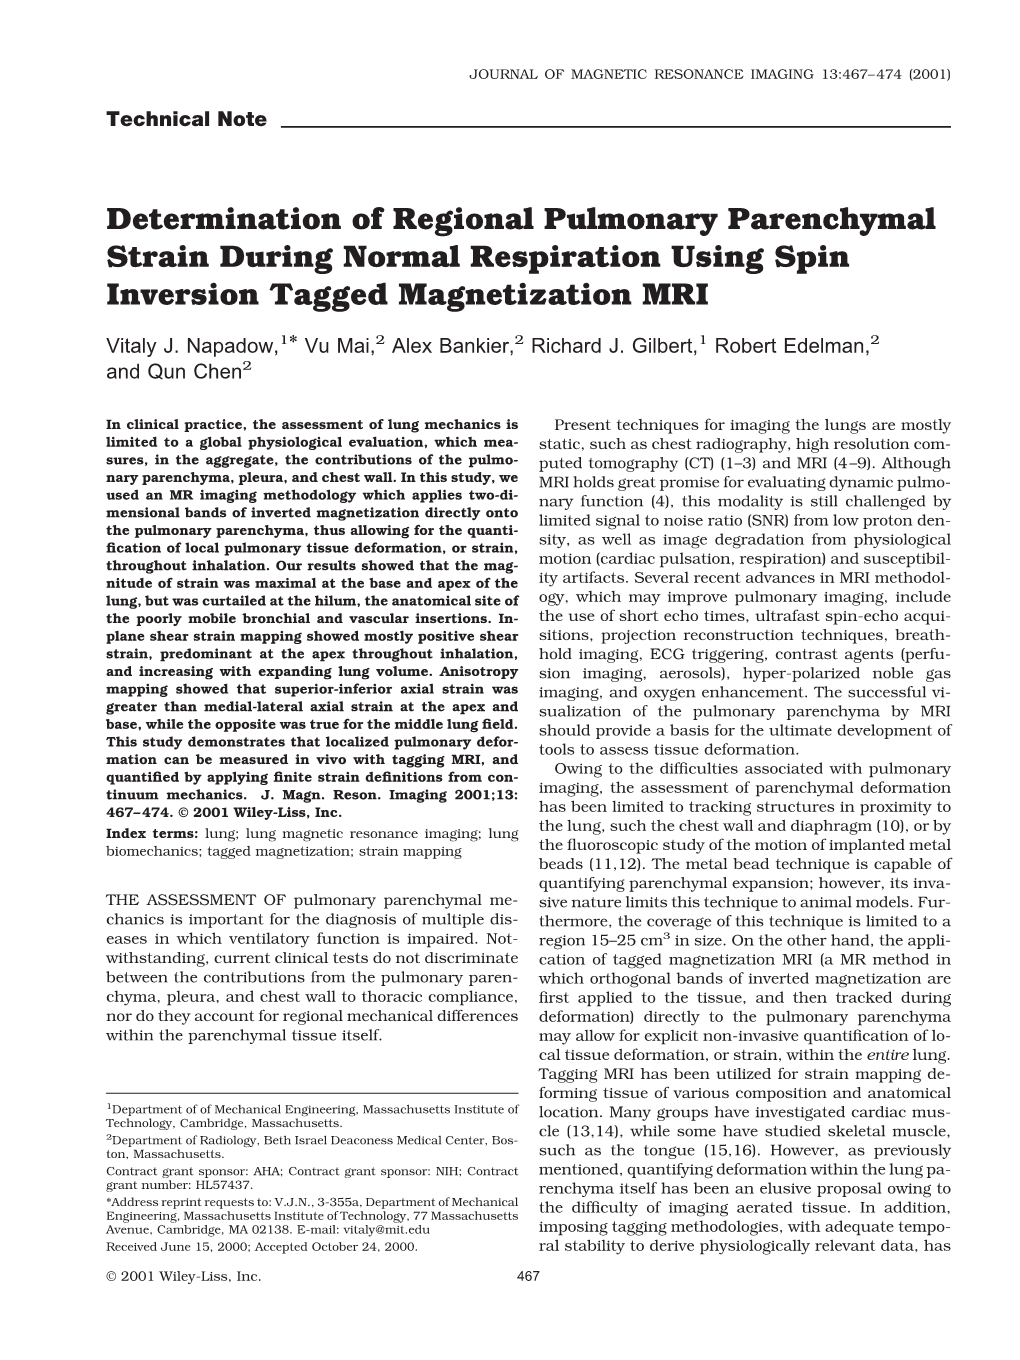 Determination of Regional Pulmonary Parenchymal Strain During Normal Respiration Using Spin Inversion Tagged Magnetization MRI